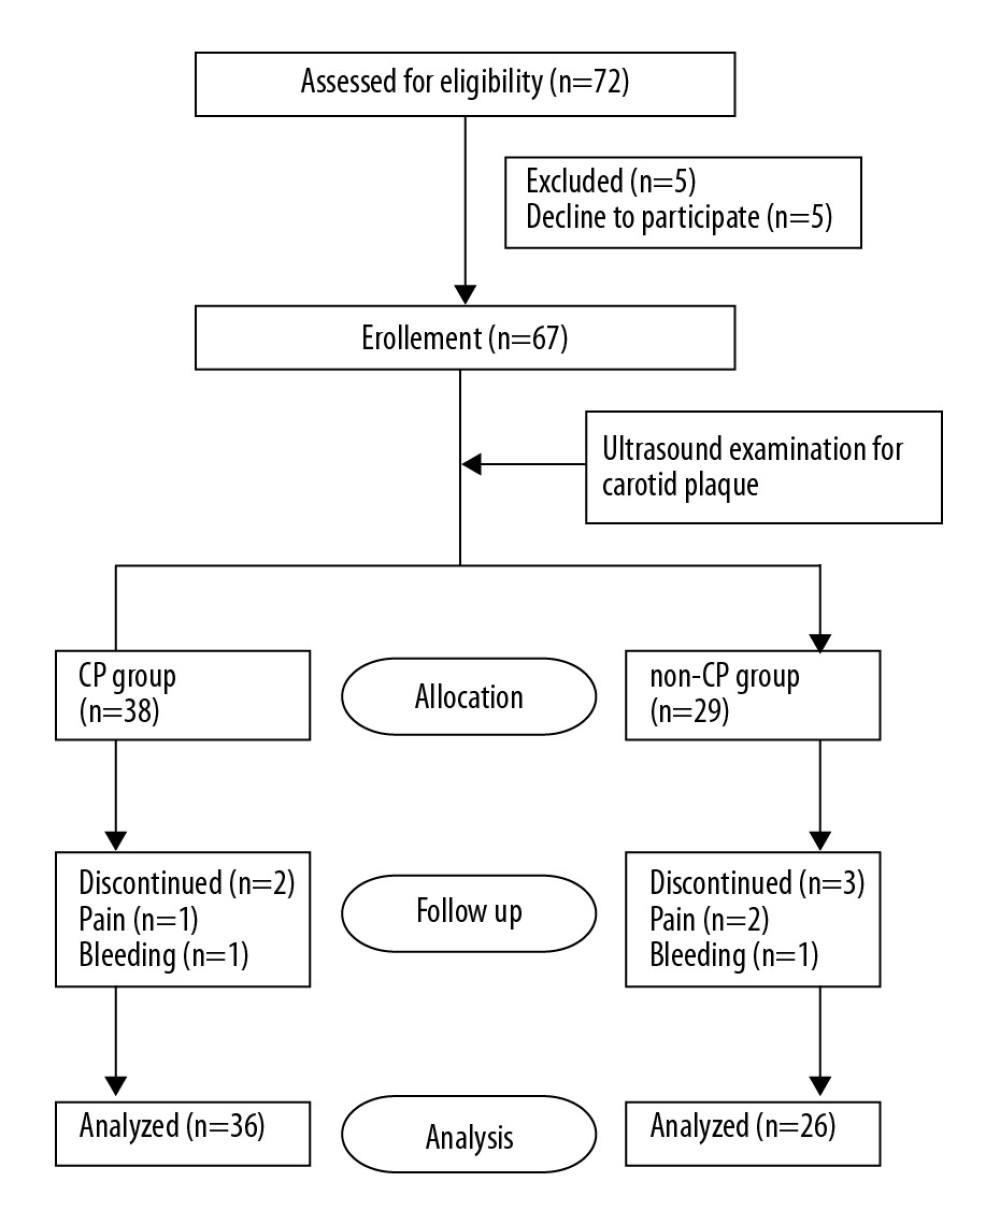 CONSORT flow diagram. Five of 72 patients declined to participate in the study. The patients were grouped by presence or absence of carotid atherosclerosis plaques before surgery. Five patients in groups were lost to follow-up because of pain and bleeding. The CAM was used by trained medical staff to diagnose postoperative delirium on postoperative days 1, 2, and 3. CAM=Confusion Assessment Method.